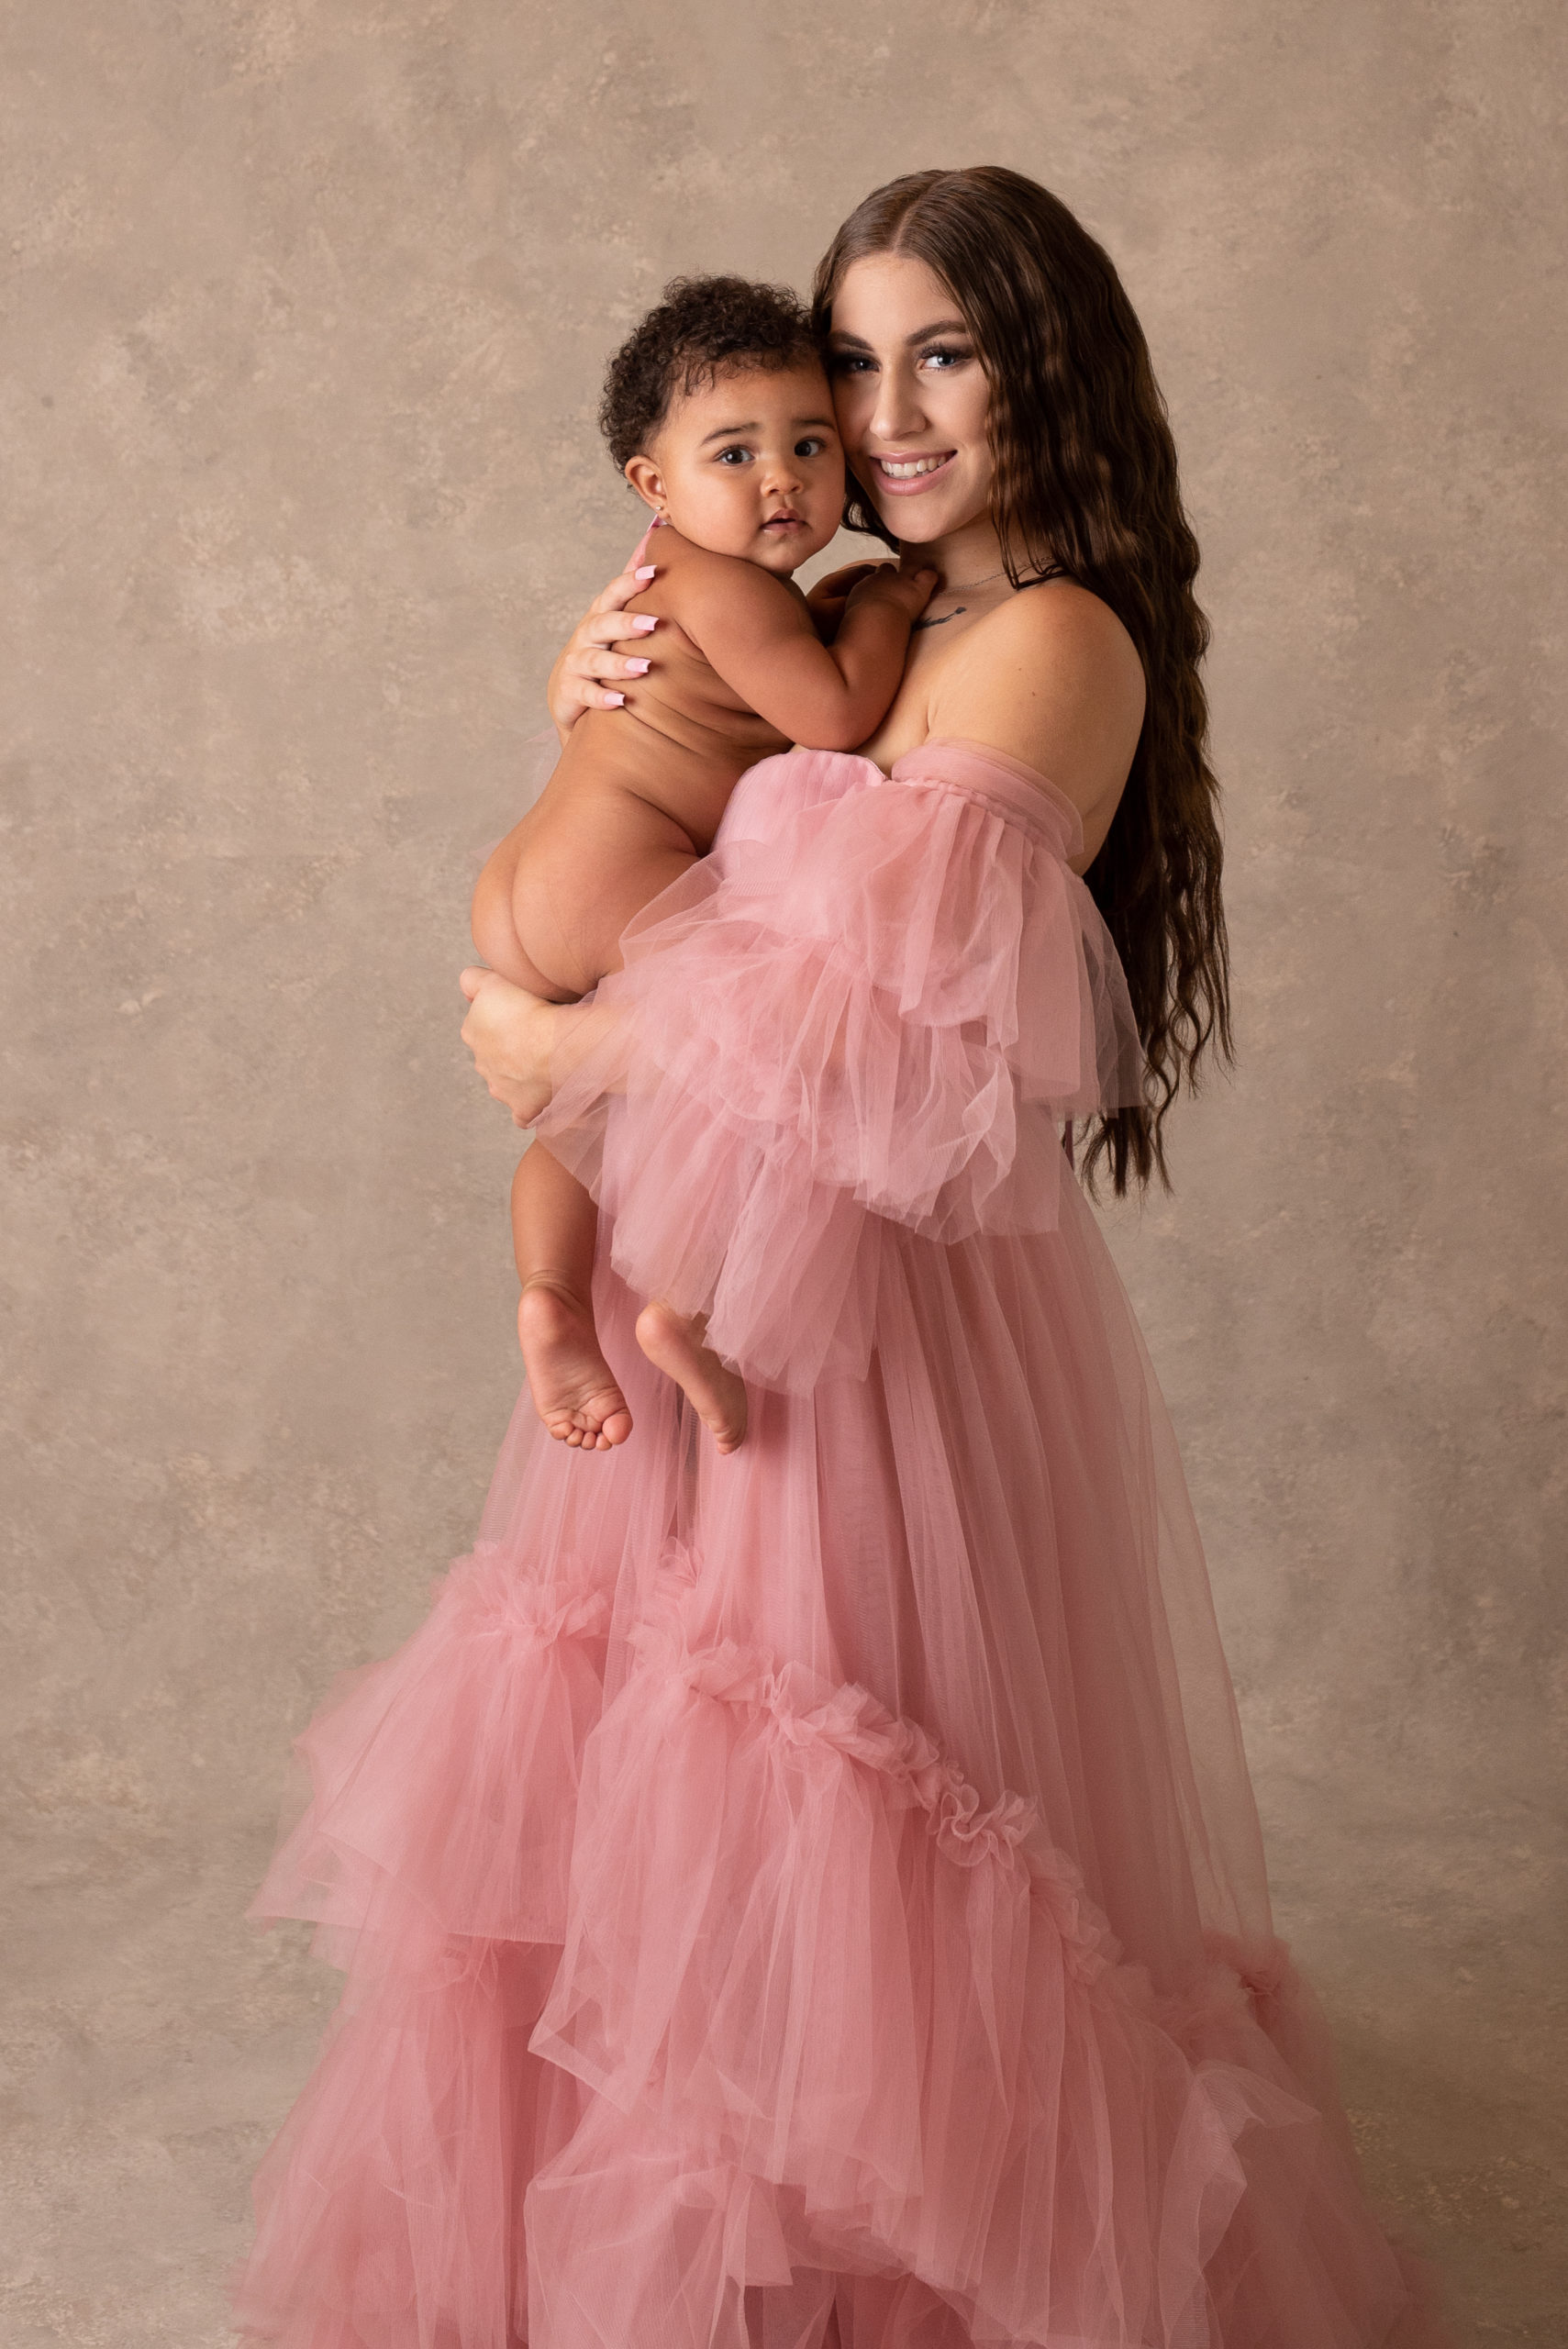 mom holding newborn in pink gown